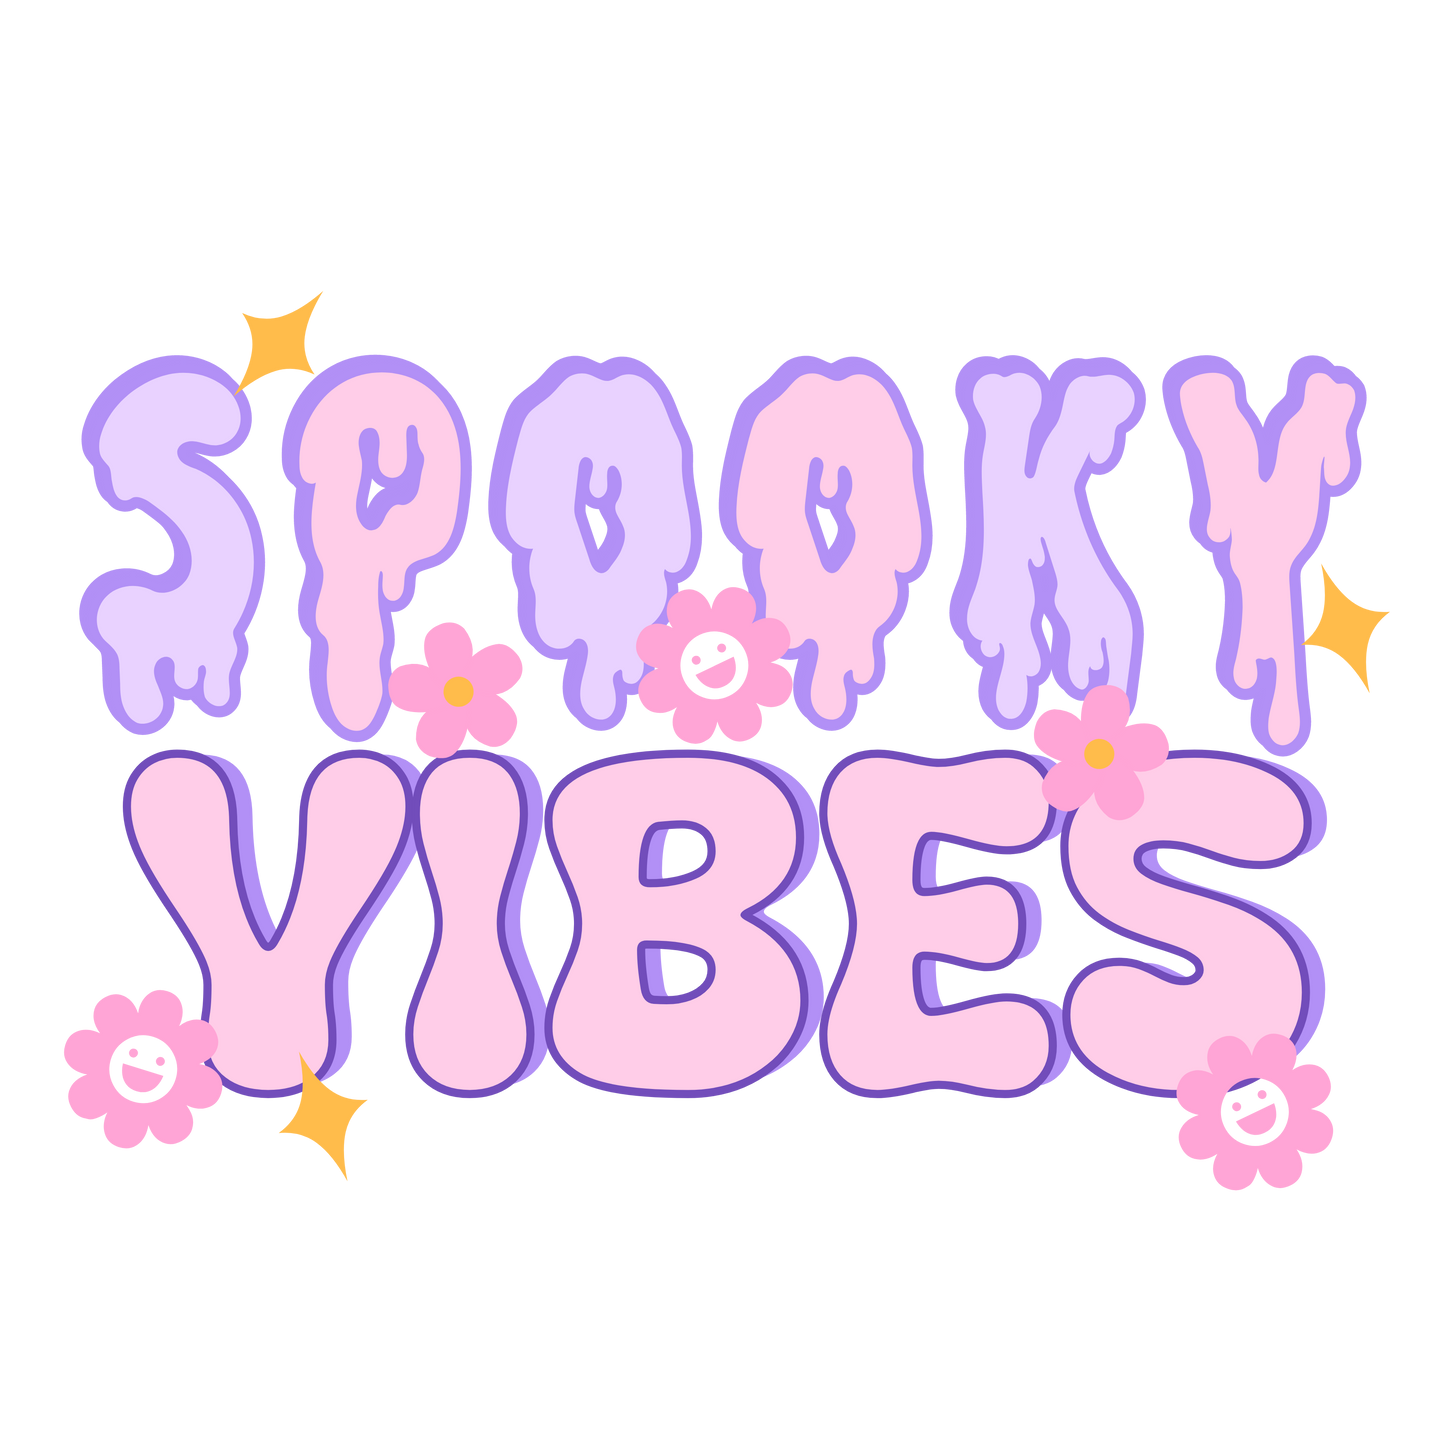 SPOOKY VIBES